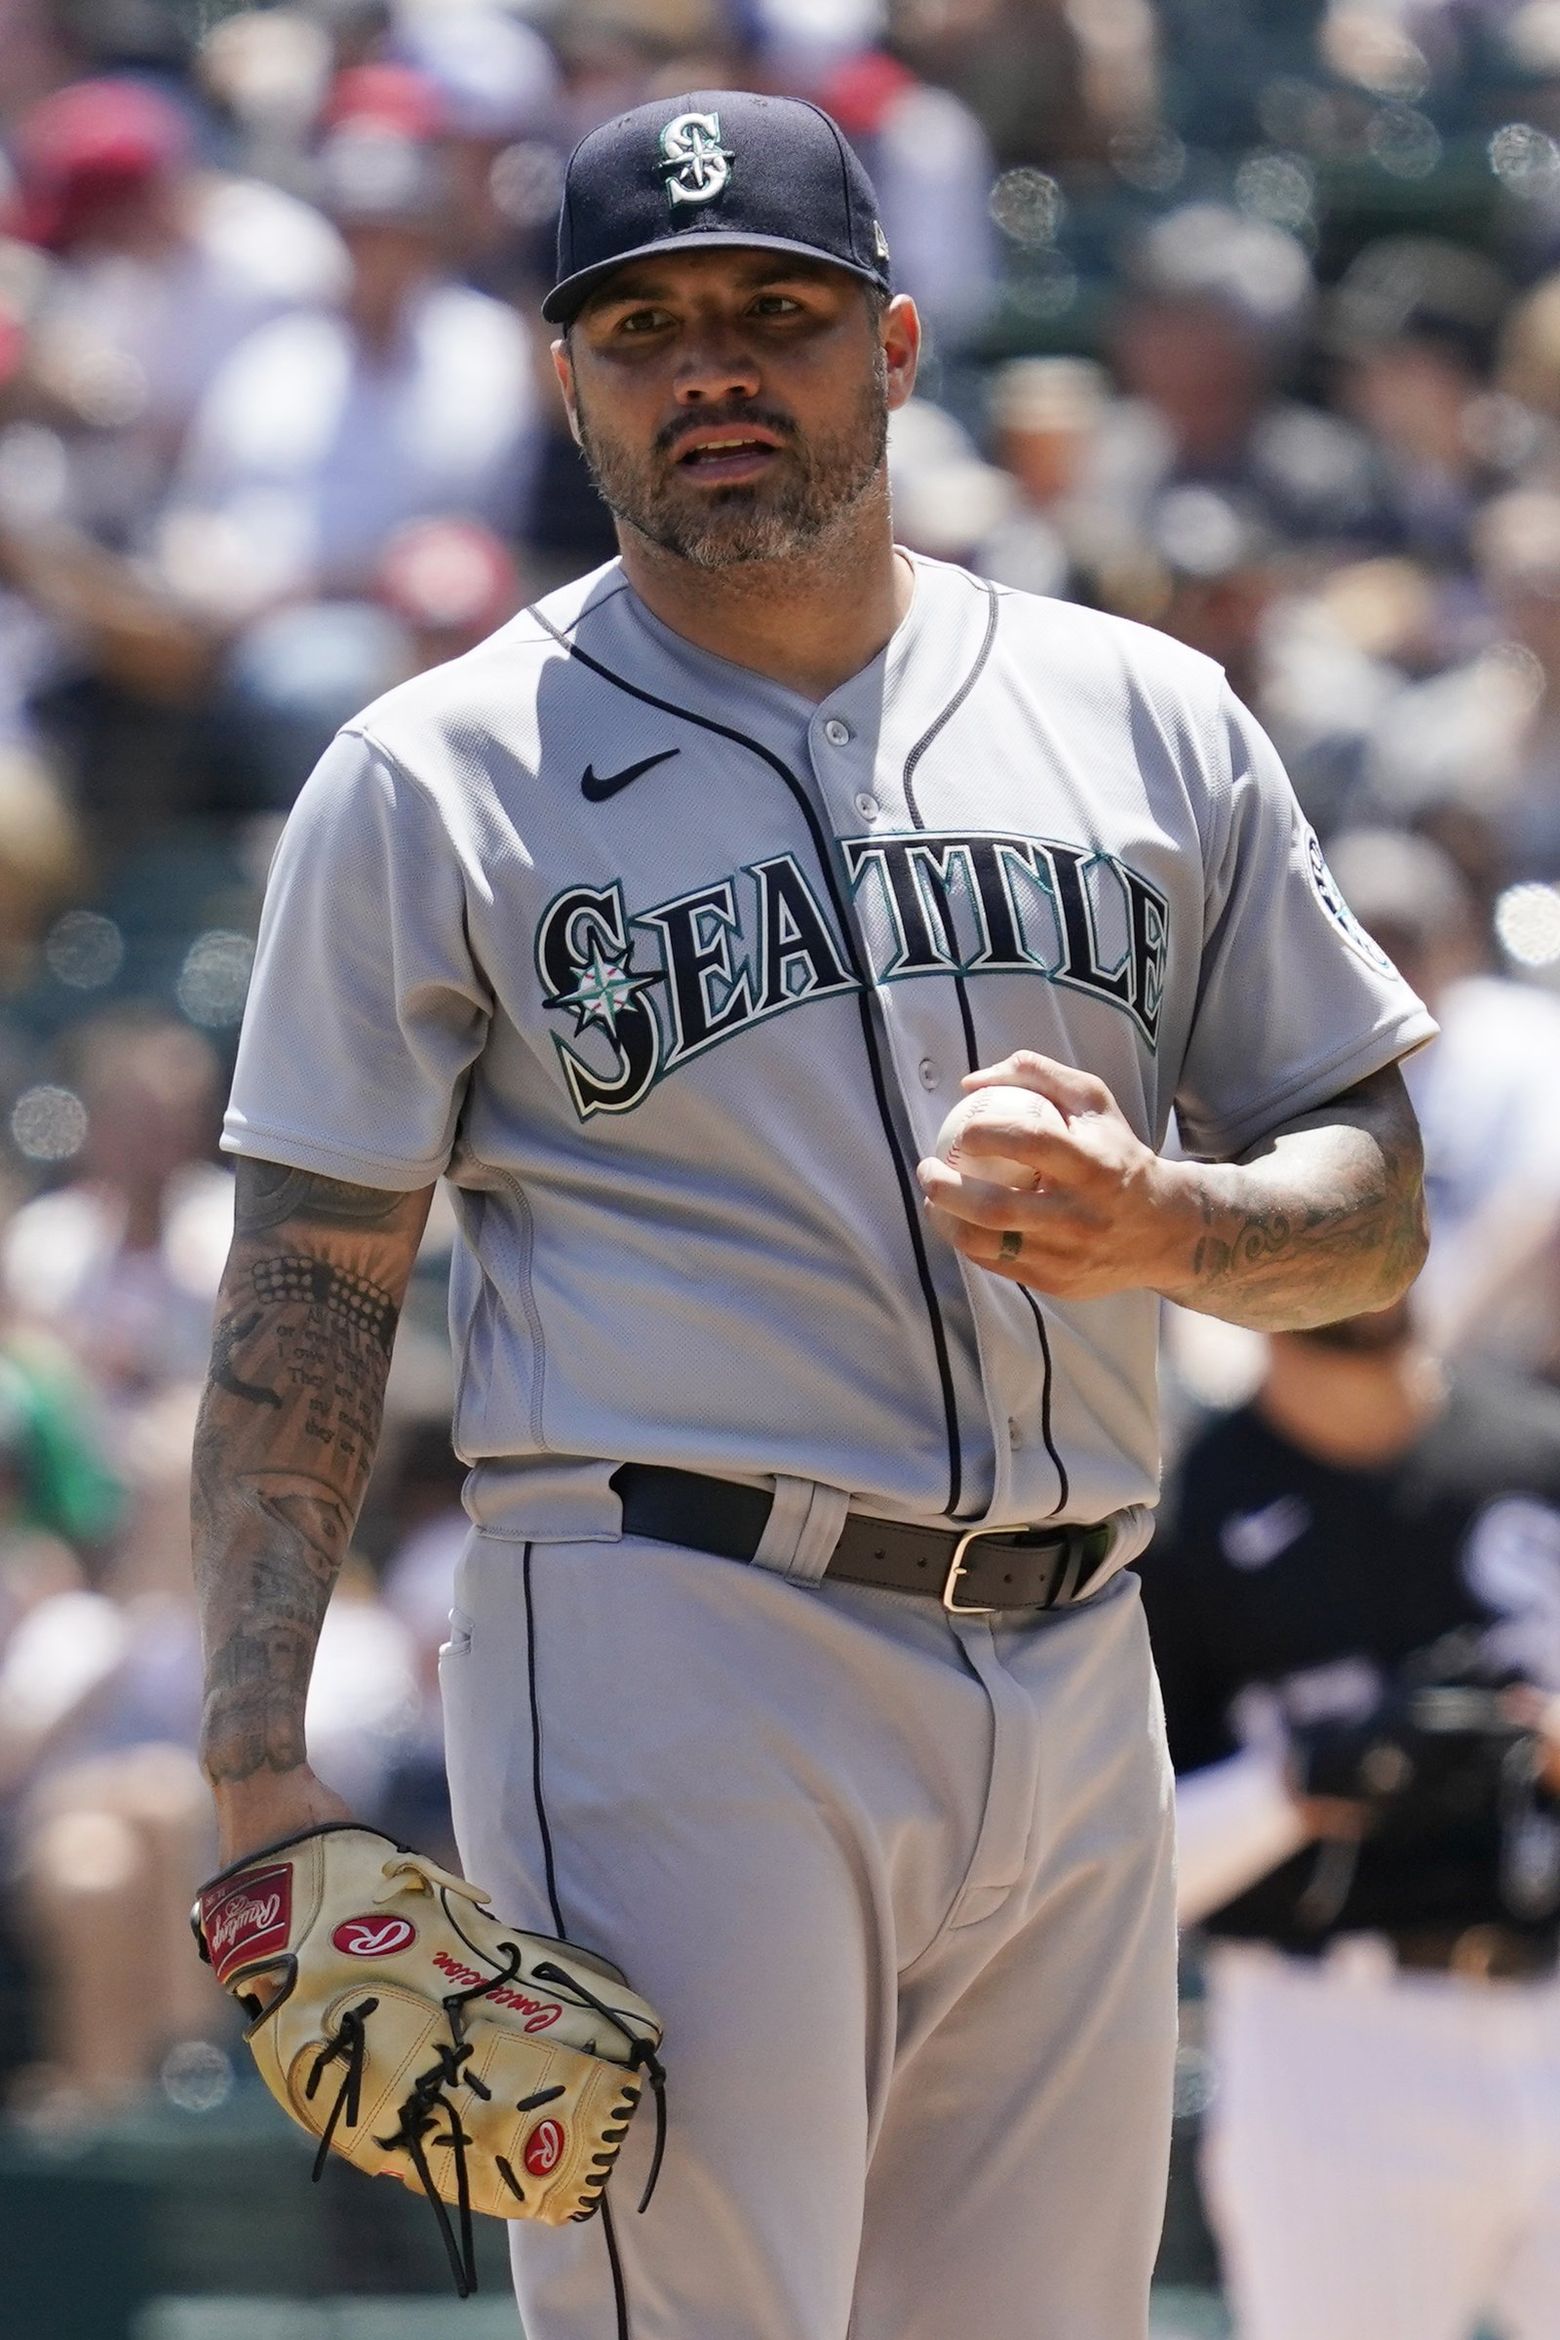 Hector Santiago's more about MLB making a point than brazen cheating | The Seattle Times